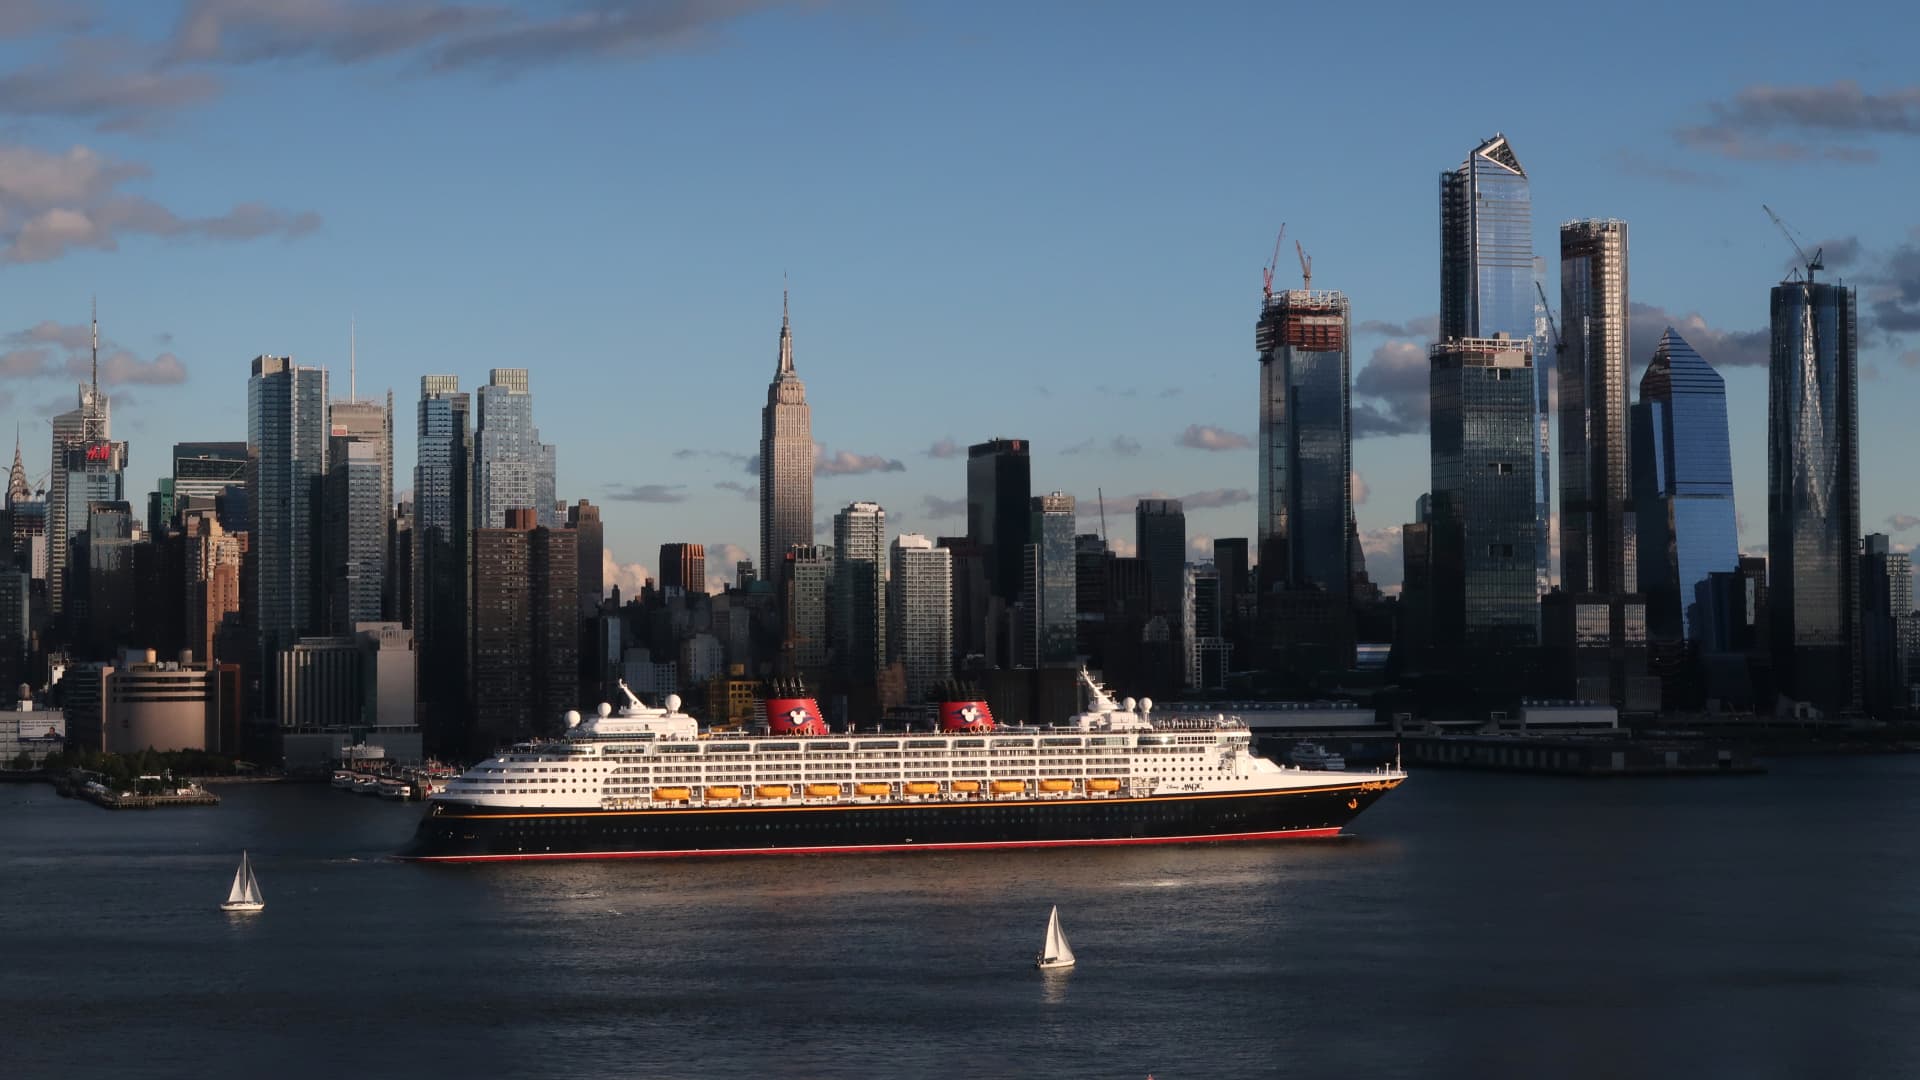 The Disney Magic cruise ship sails past Manhattan with the Empire State Building in the background.